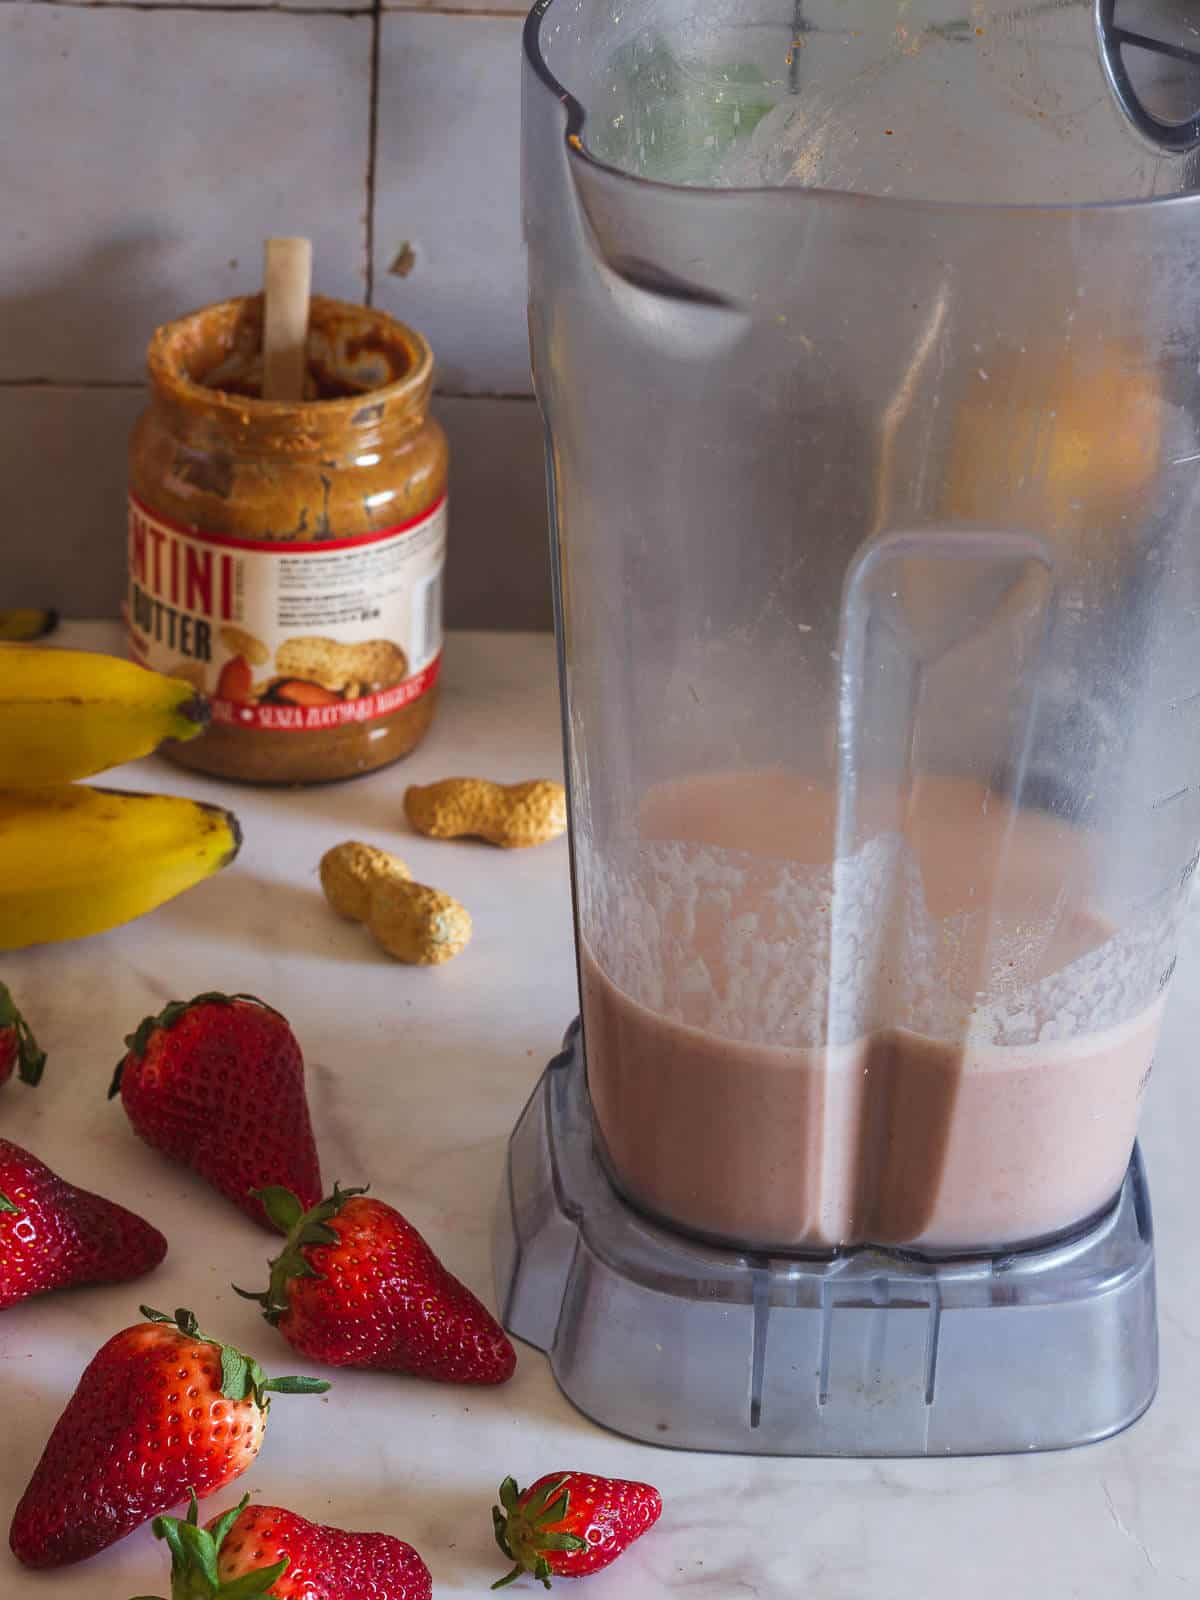 blend until the smoothie is creamy.